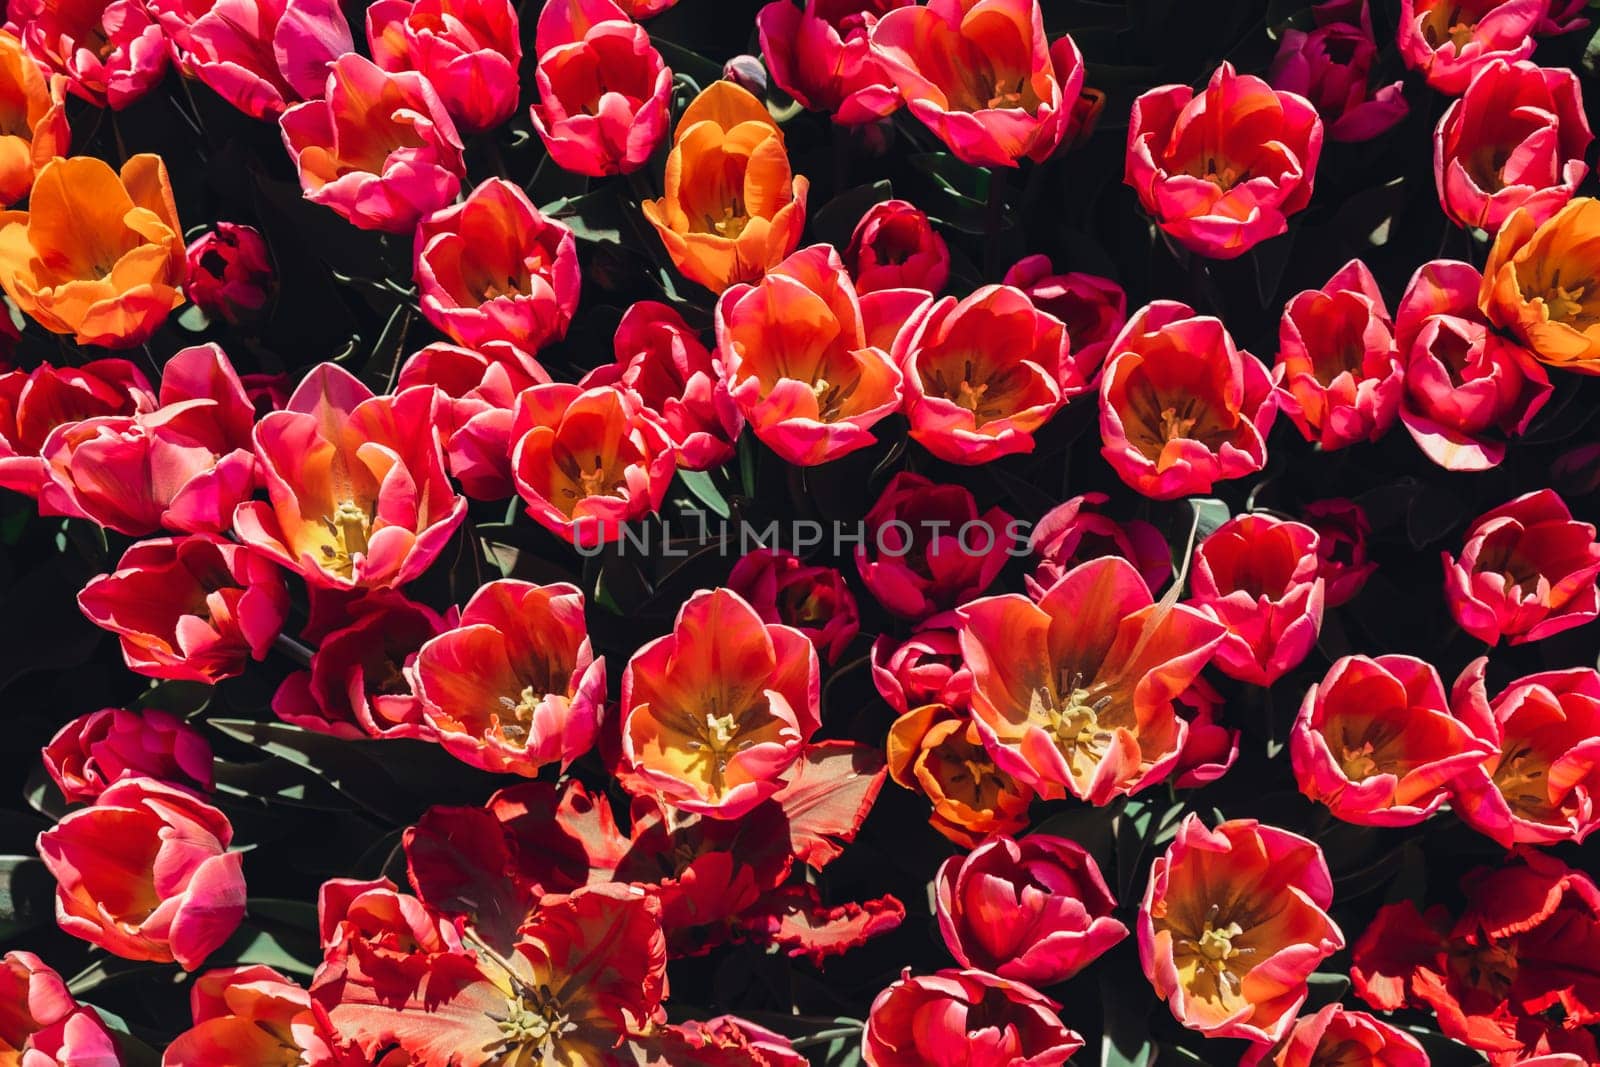 Pink Tulip flowers blooming in the garden field landscape. Beautiful spring garden with many red tulips outdoors. Blooming floral park in sunrise light. Stripped tulips growing in flourish meadow sunny day Keukenhof. Natural floral pattern blowing in wind in spring